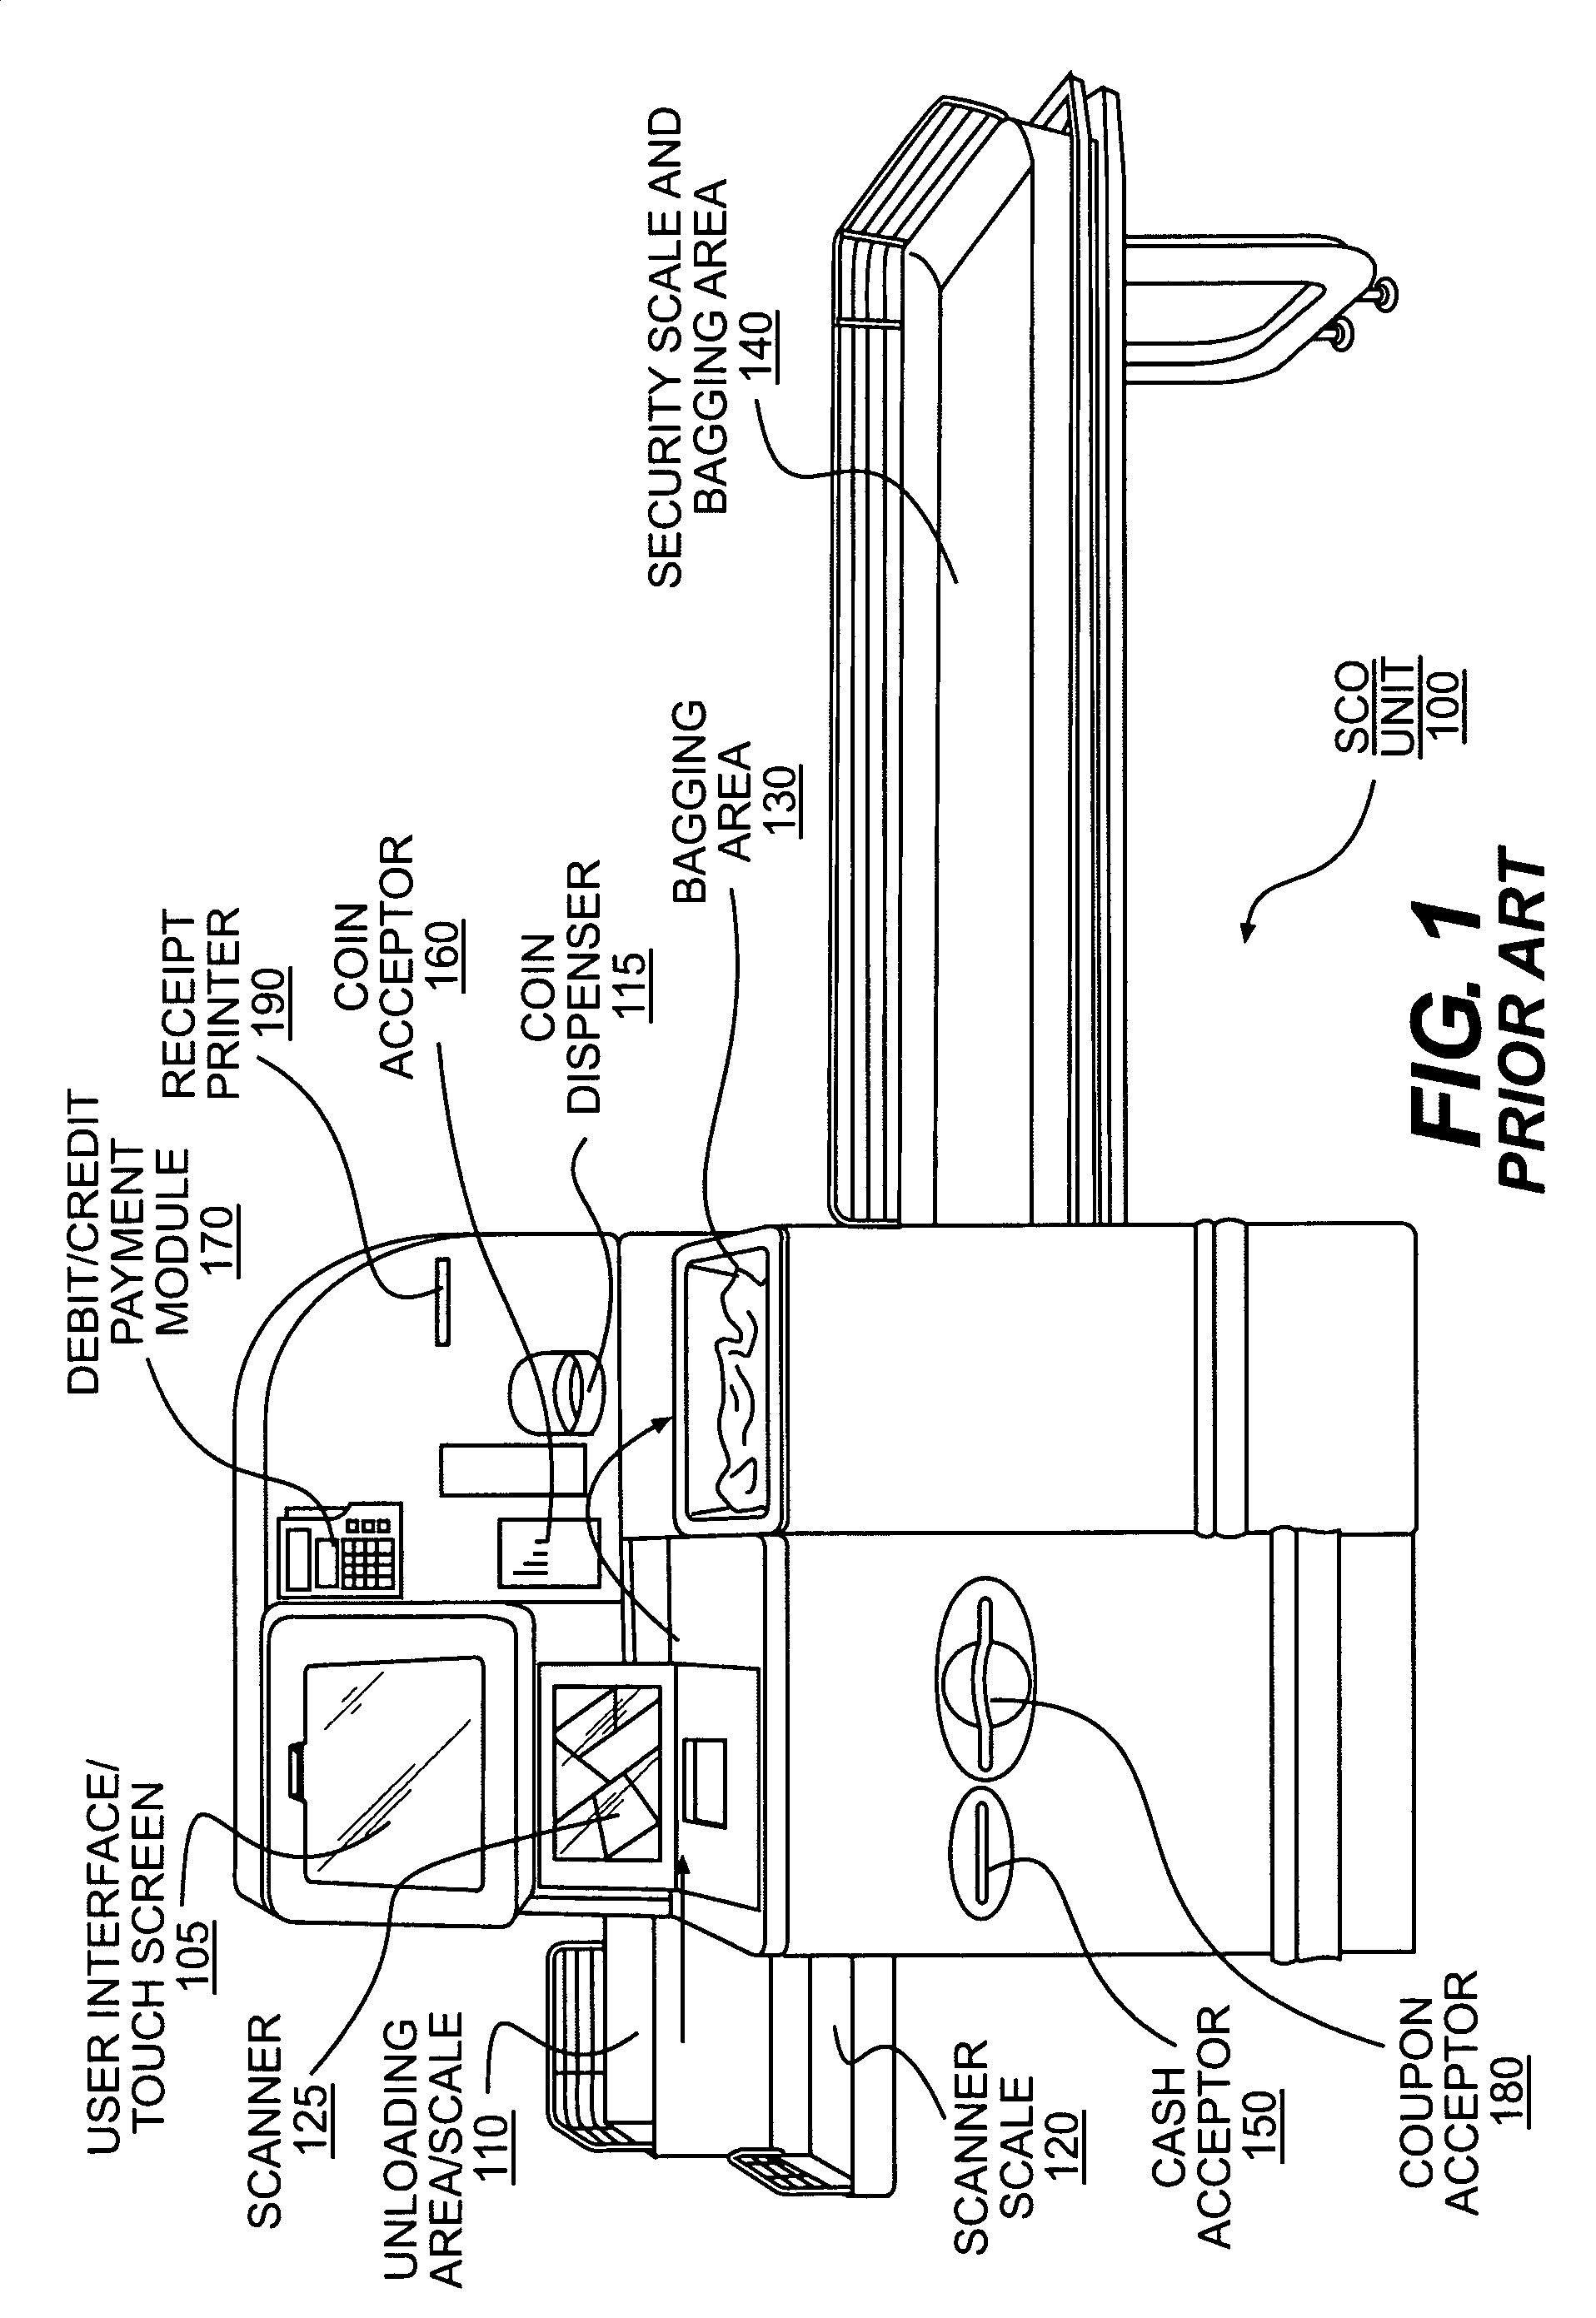 Self-checkout security system and method therefor